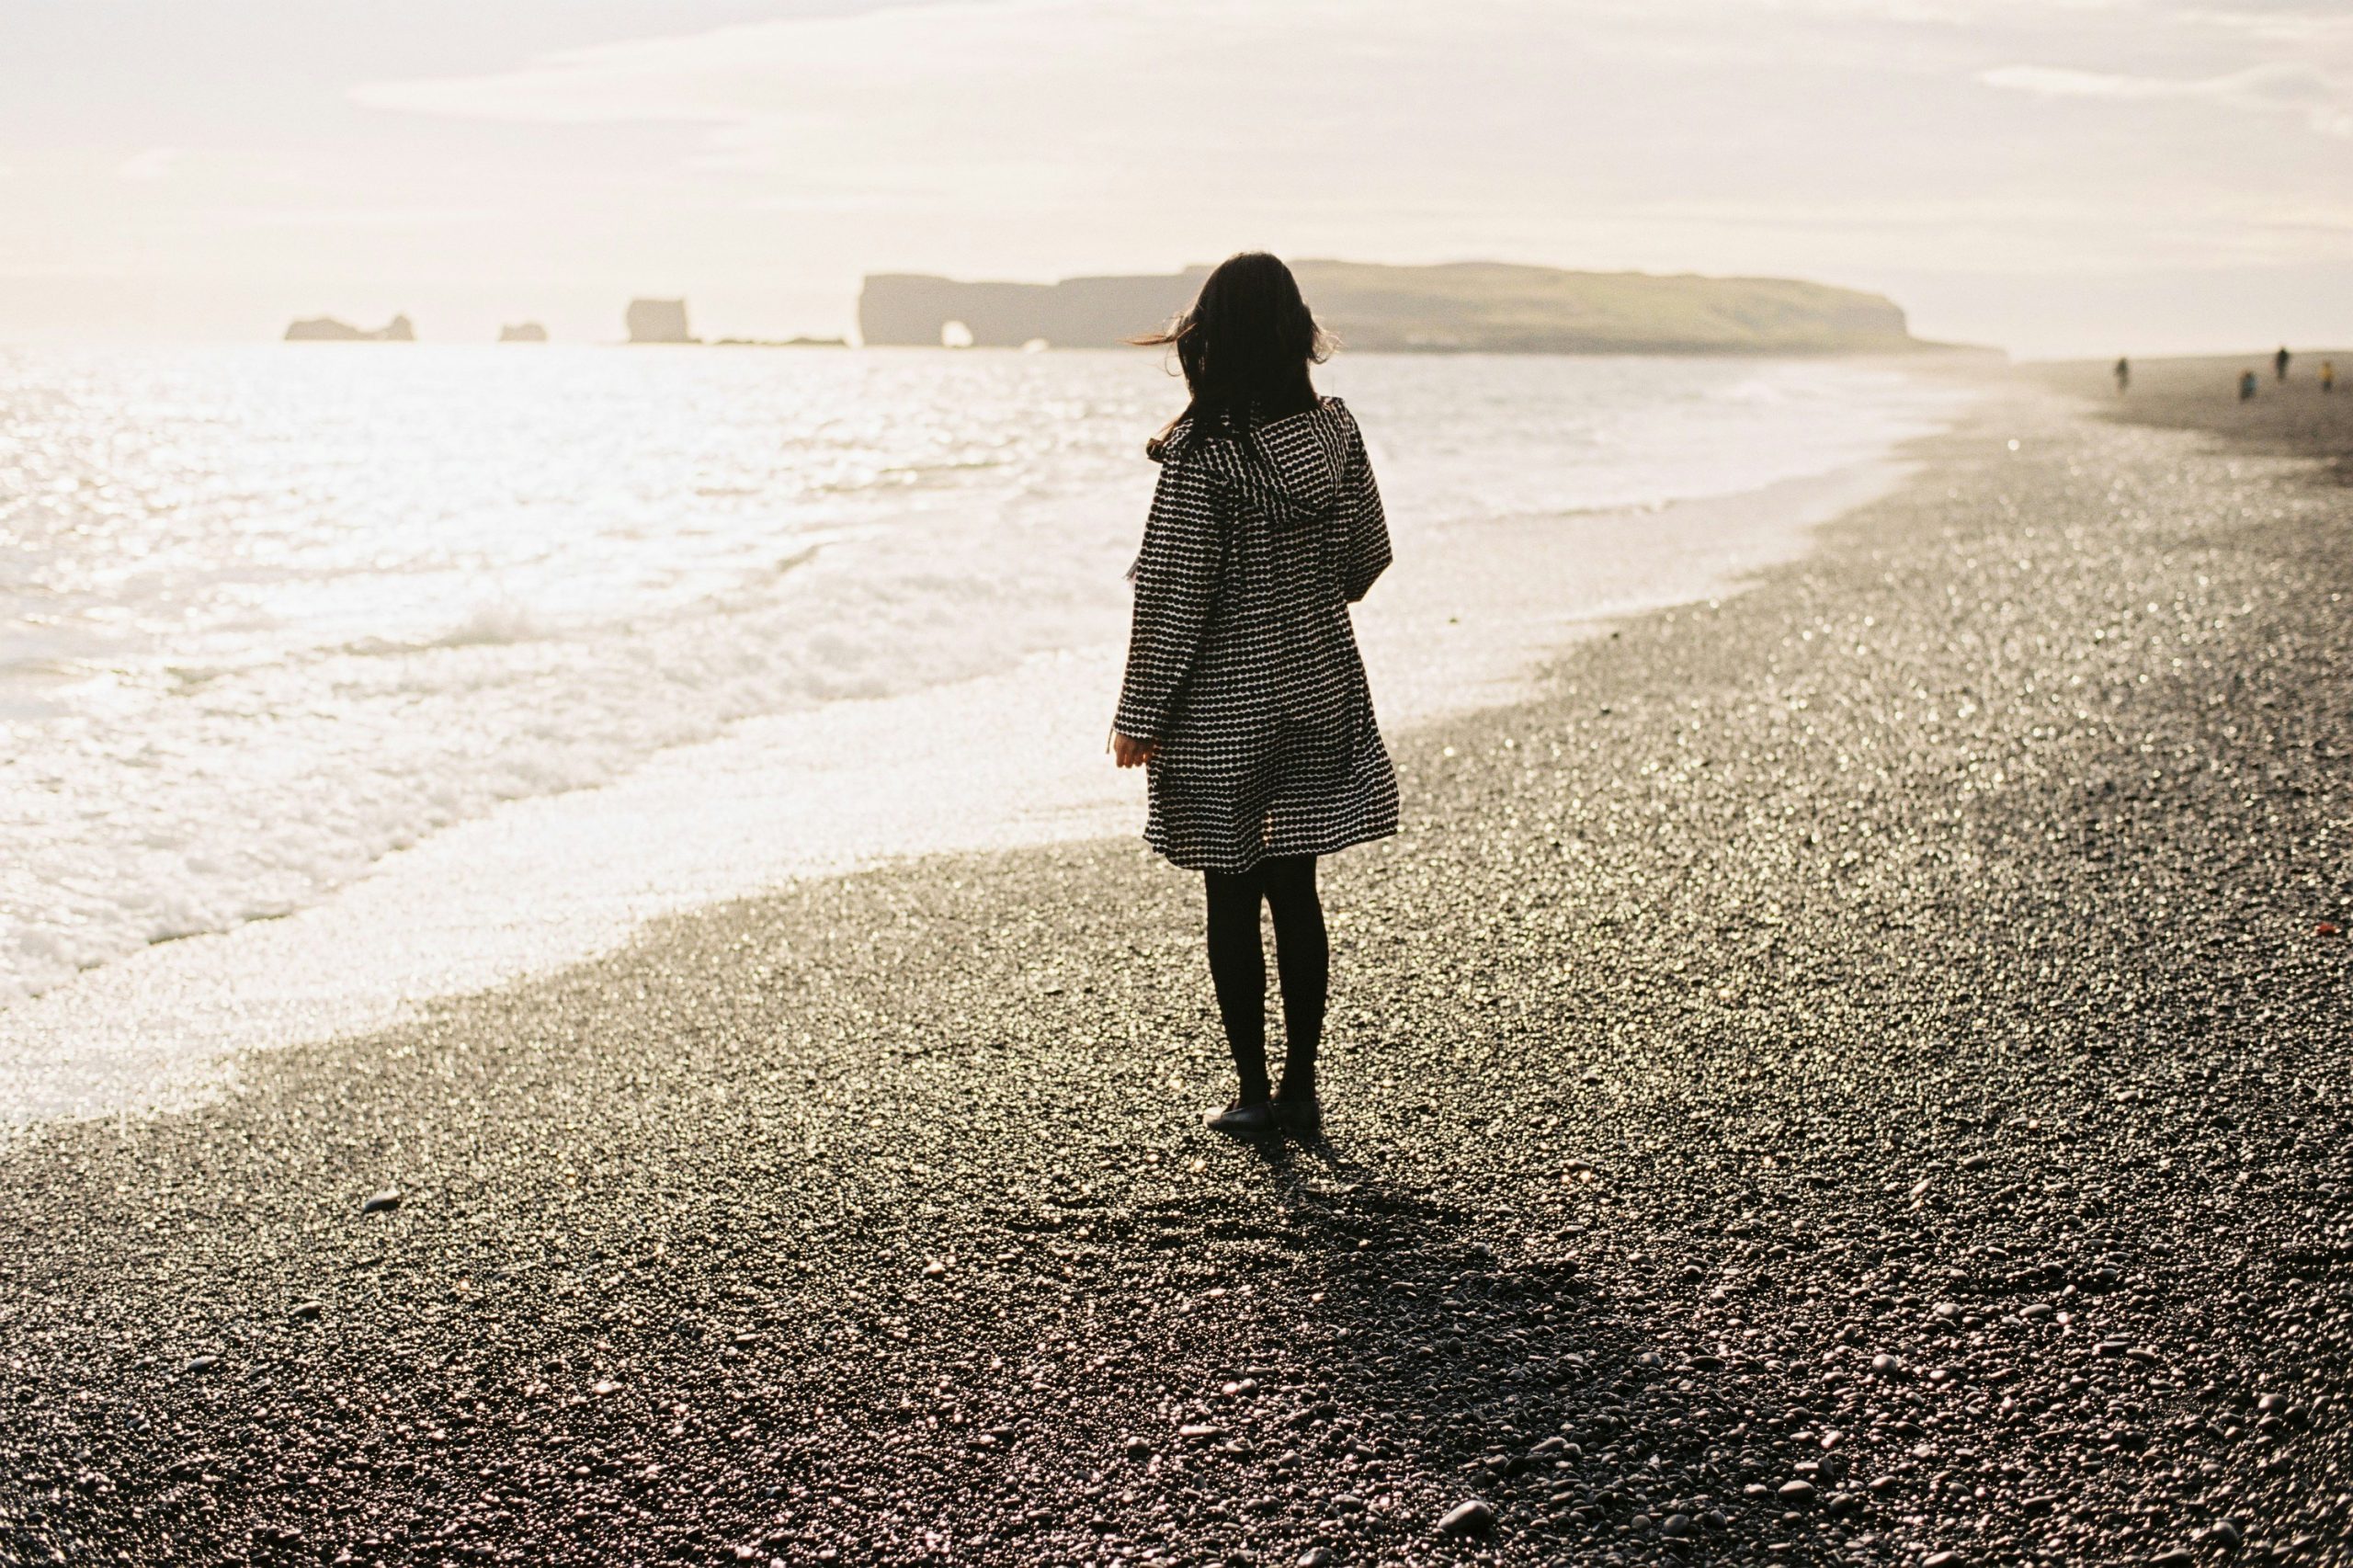 Alone Time: Woman standing alone at an Icelandic beach. 